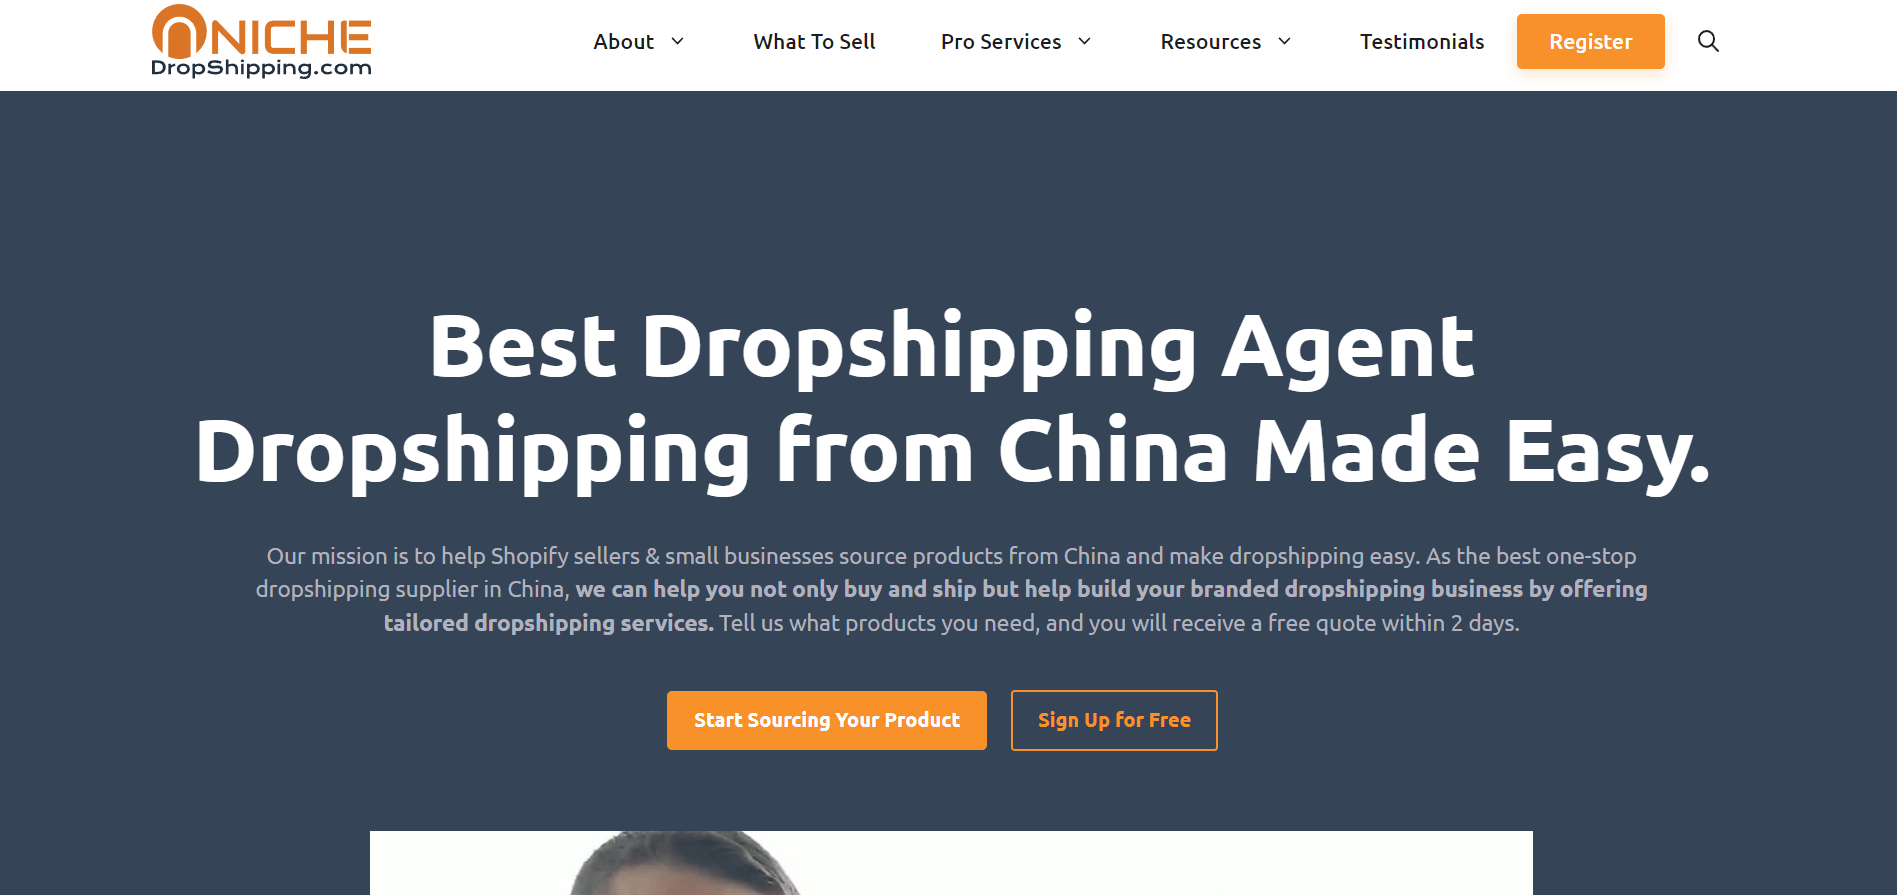 NicheDropshipping free dropshipping suppliers usa